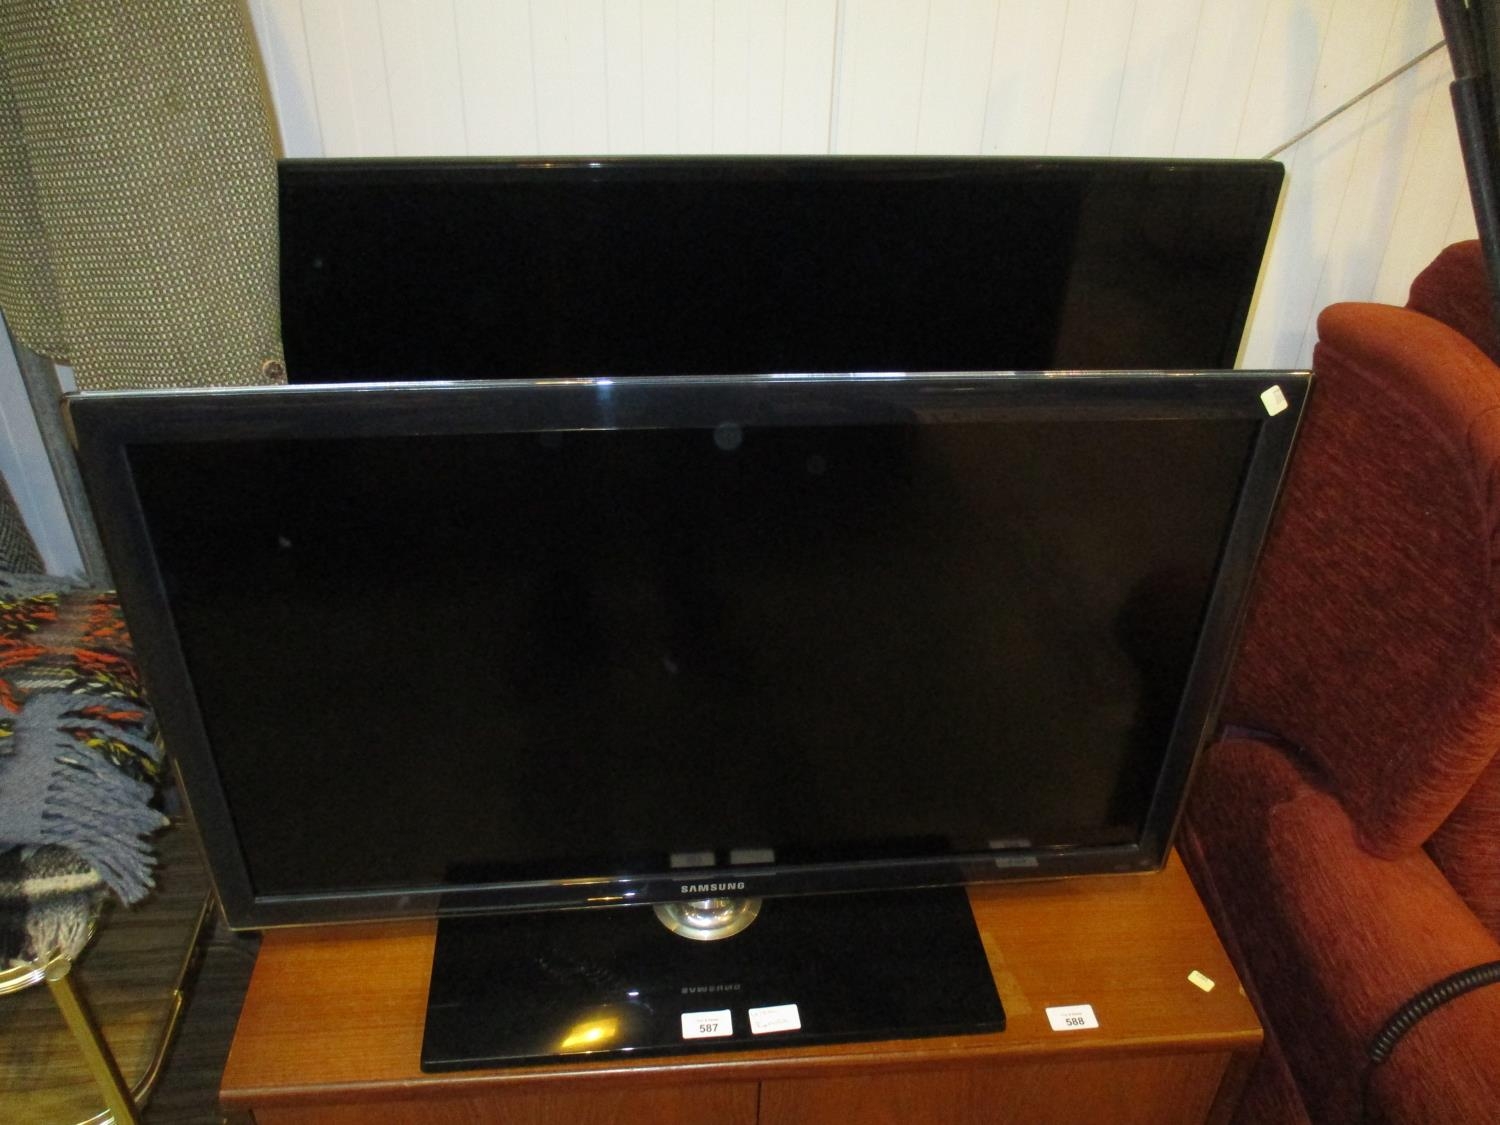 Samsung and Panasonic TVs, one power cable, one remote